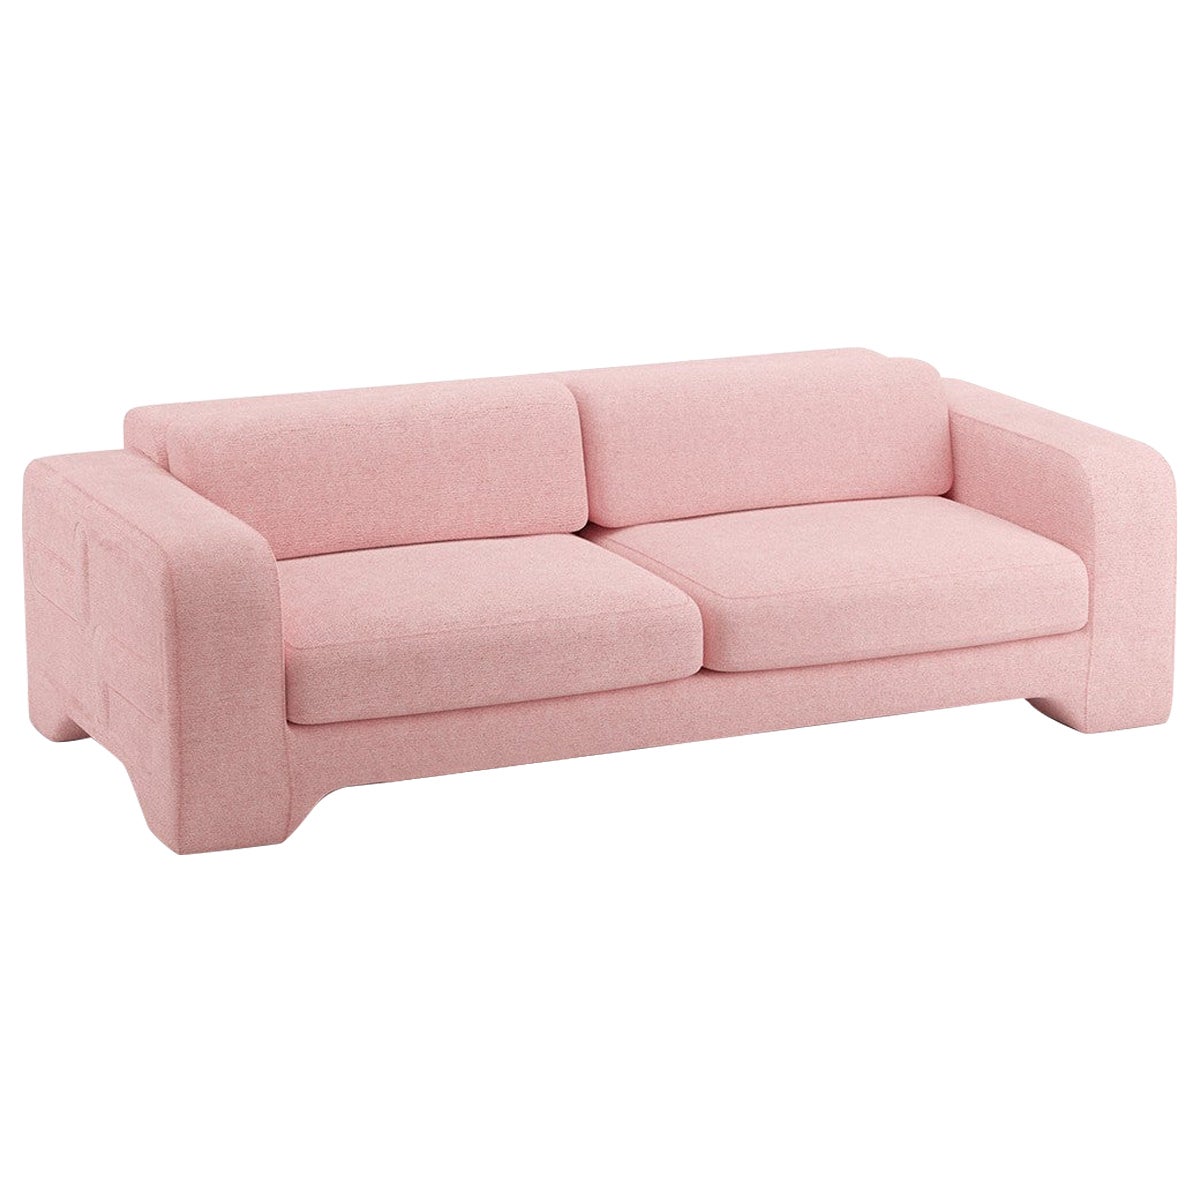 Popus Editions Giovanna 2.5 Seater Sofa in Pink Megeve Fabric with Knit Effect For Sale